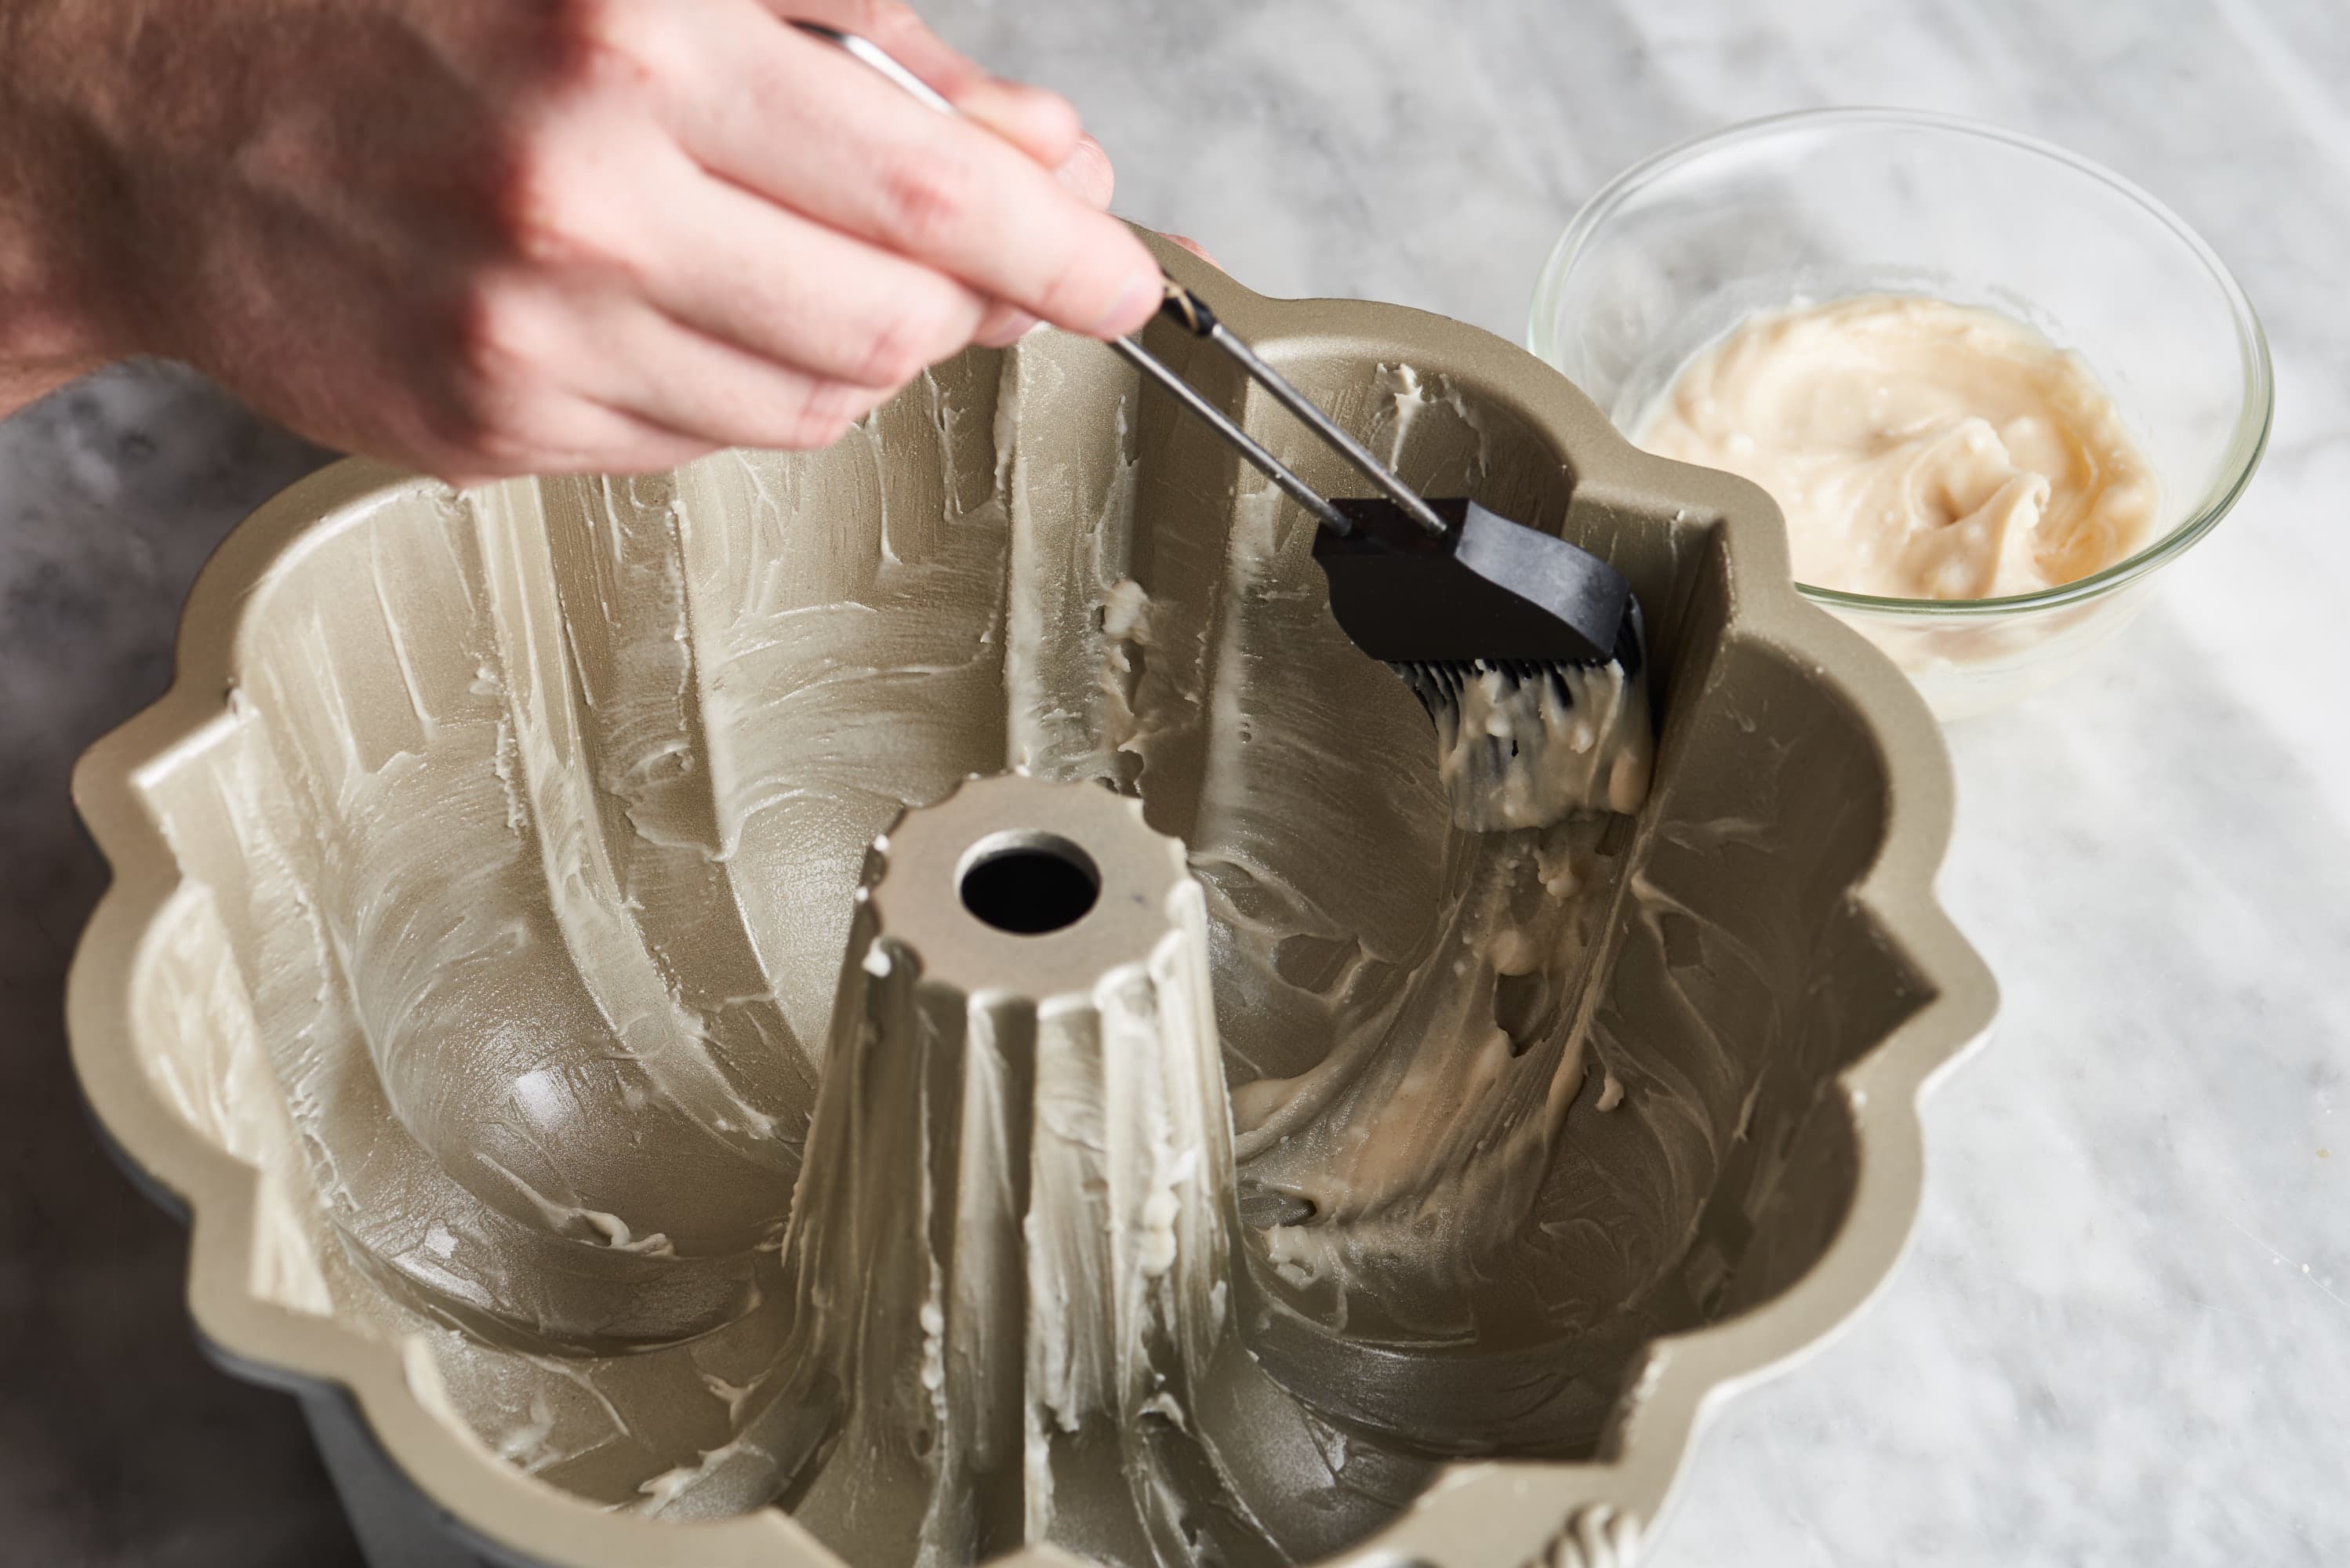 How to Prevent Bundt Cake from Sticking - Handle the Heat